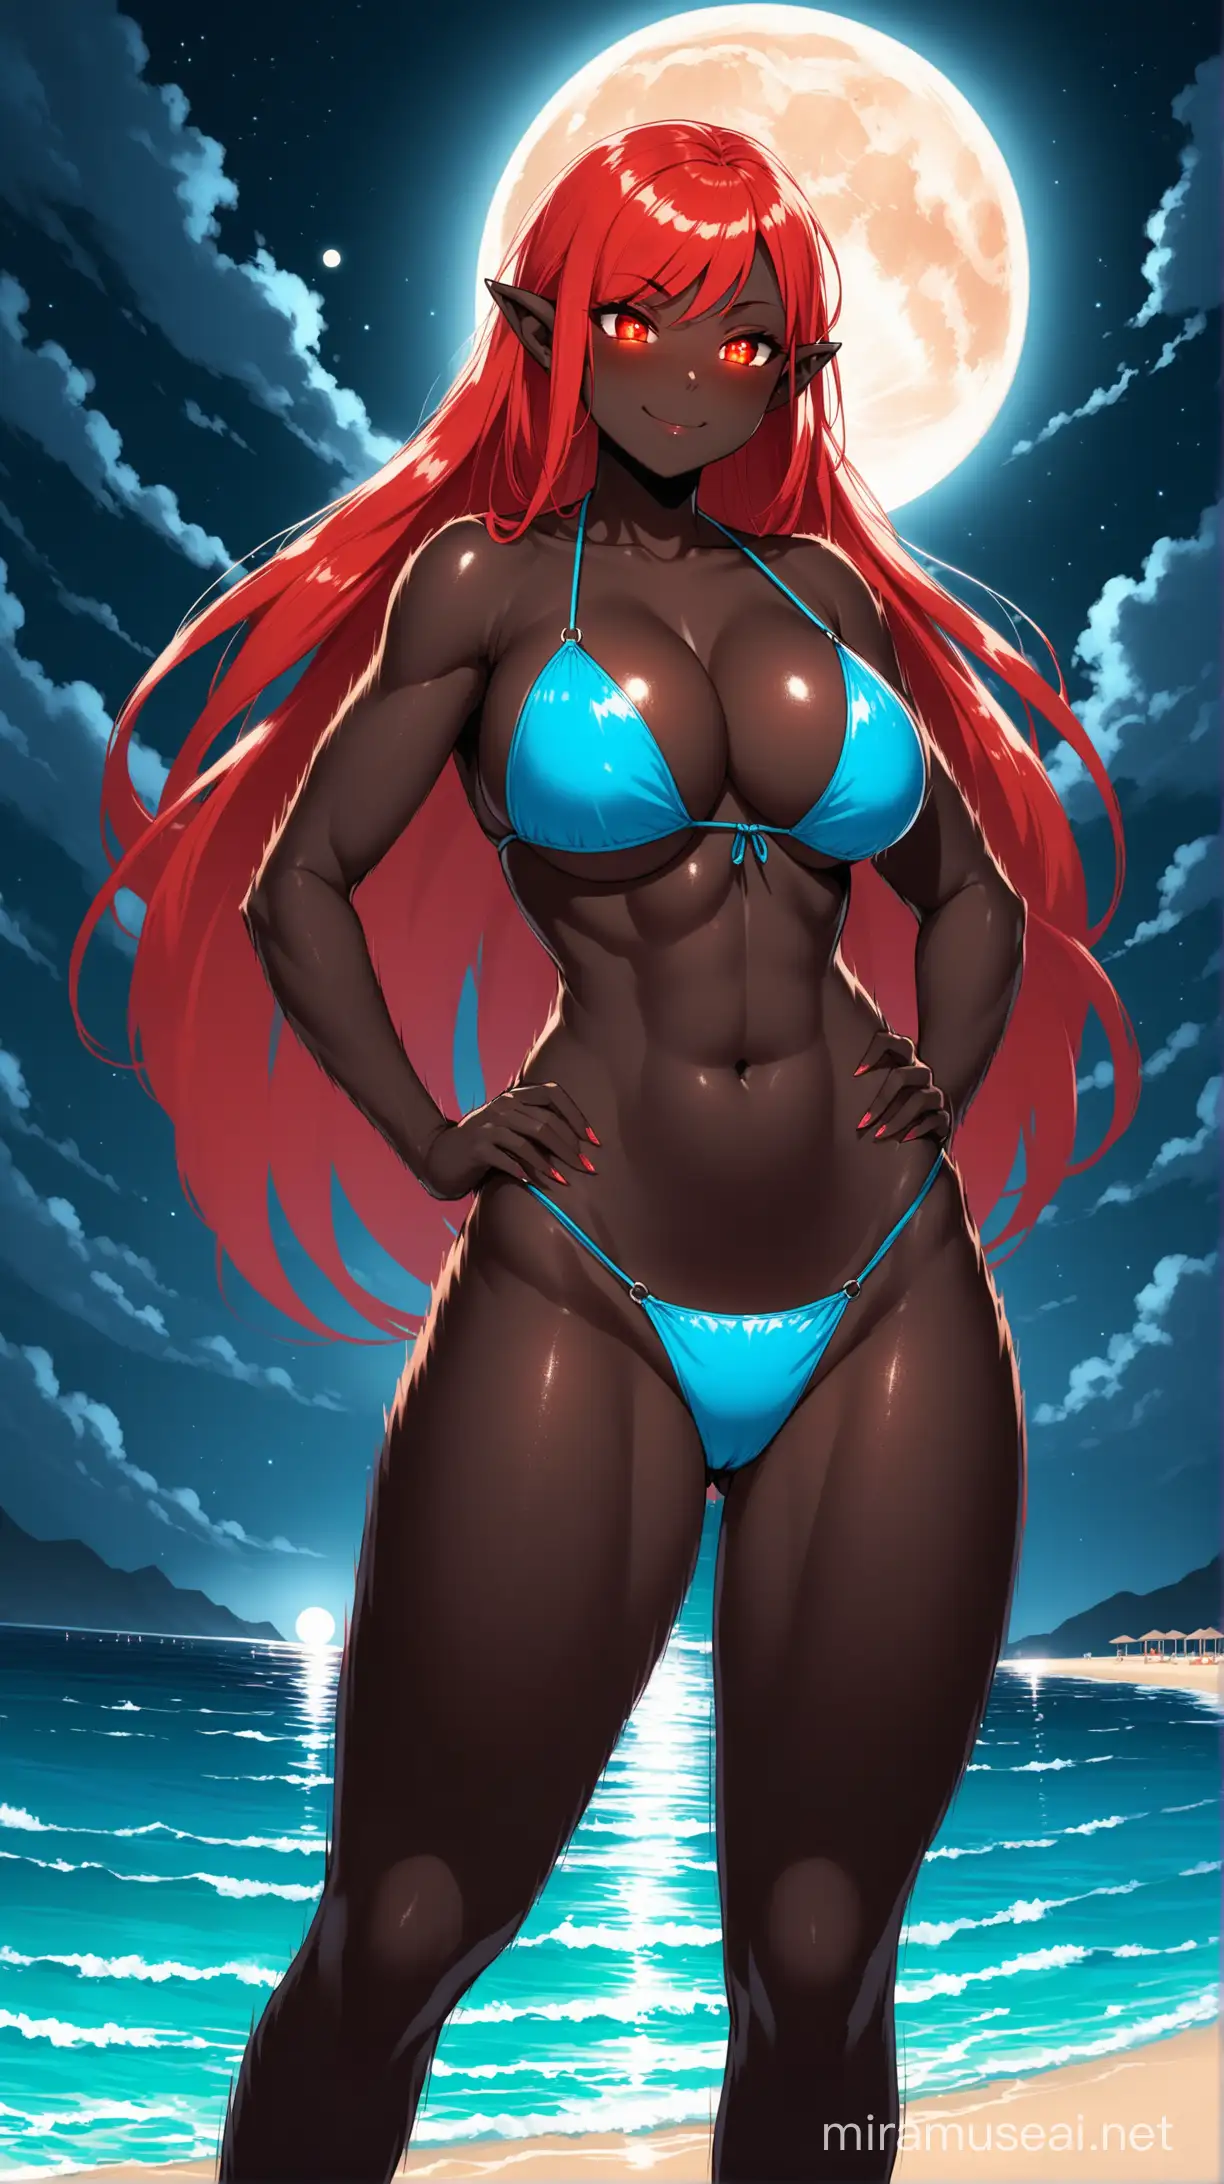 Pointed ears, giantess, low perspective, looking down, looking at camera, glowing eyes, red eyes, glowing red eyes, front perspective, single female, solo female, sexy, thin, smiling, red hair, beach, ocean, looking at viewer, long hair, woman, female, front view, tall, thick tighs, black skin, pure black skin, dark skin, shiny hair, unnatural skin color, extremely dark skin, big breasts, hands in hips, black sclera, nigh, full moon, blue bikini, blue swimwear, microkini, micro bikini, tiny bikini, giant breasts